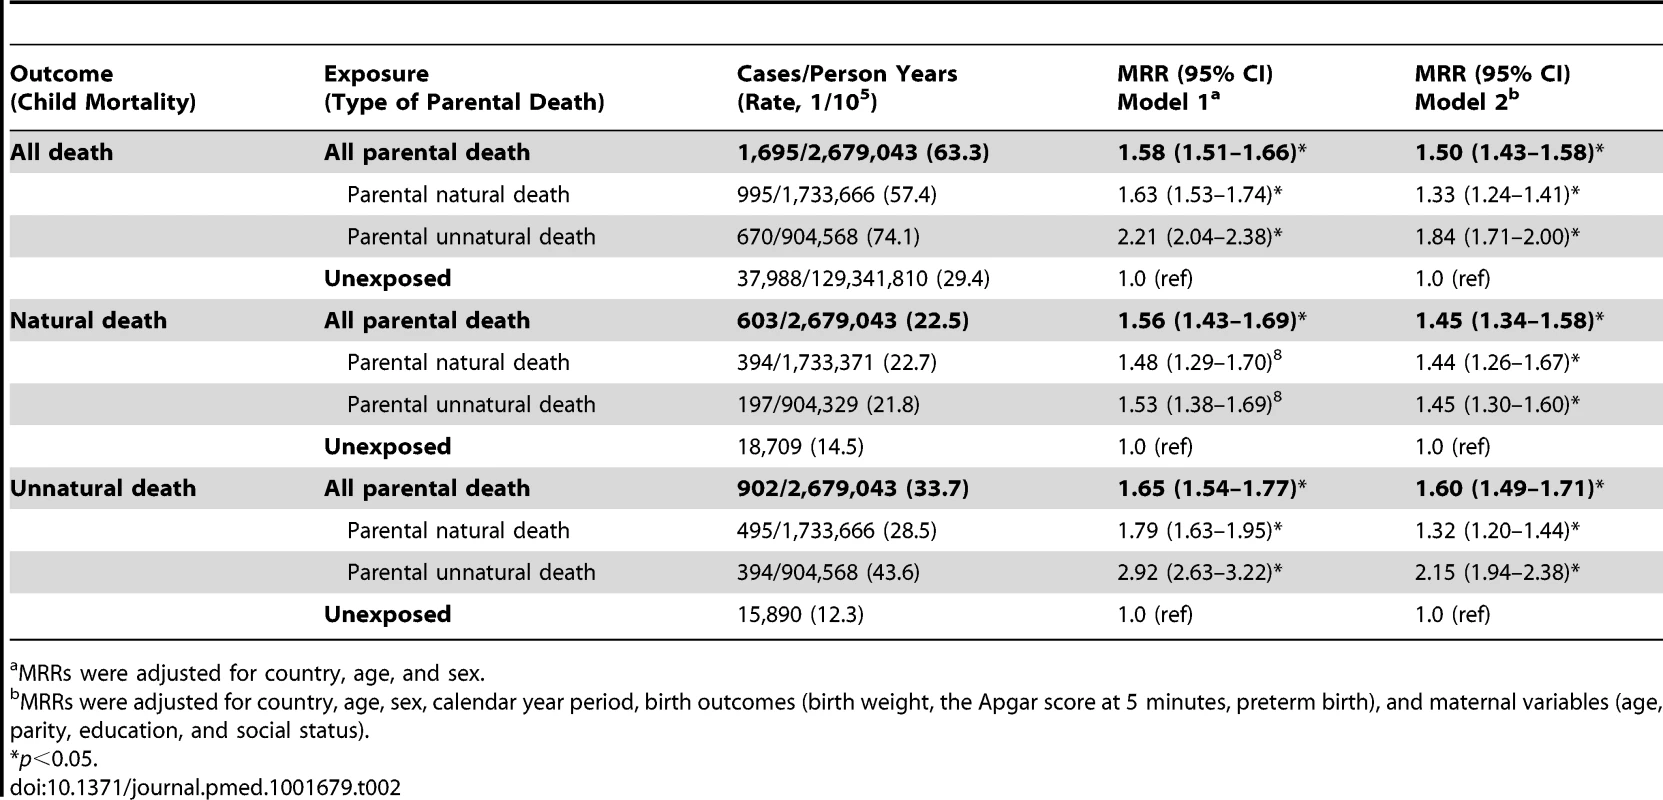 Mortality rate ratios after parental death in childhood, by type of death.